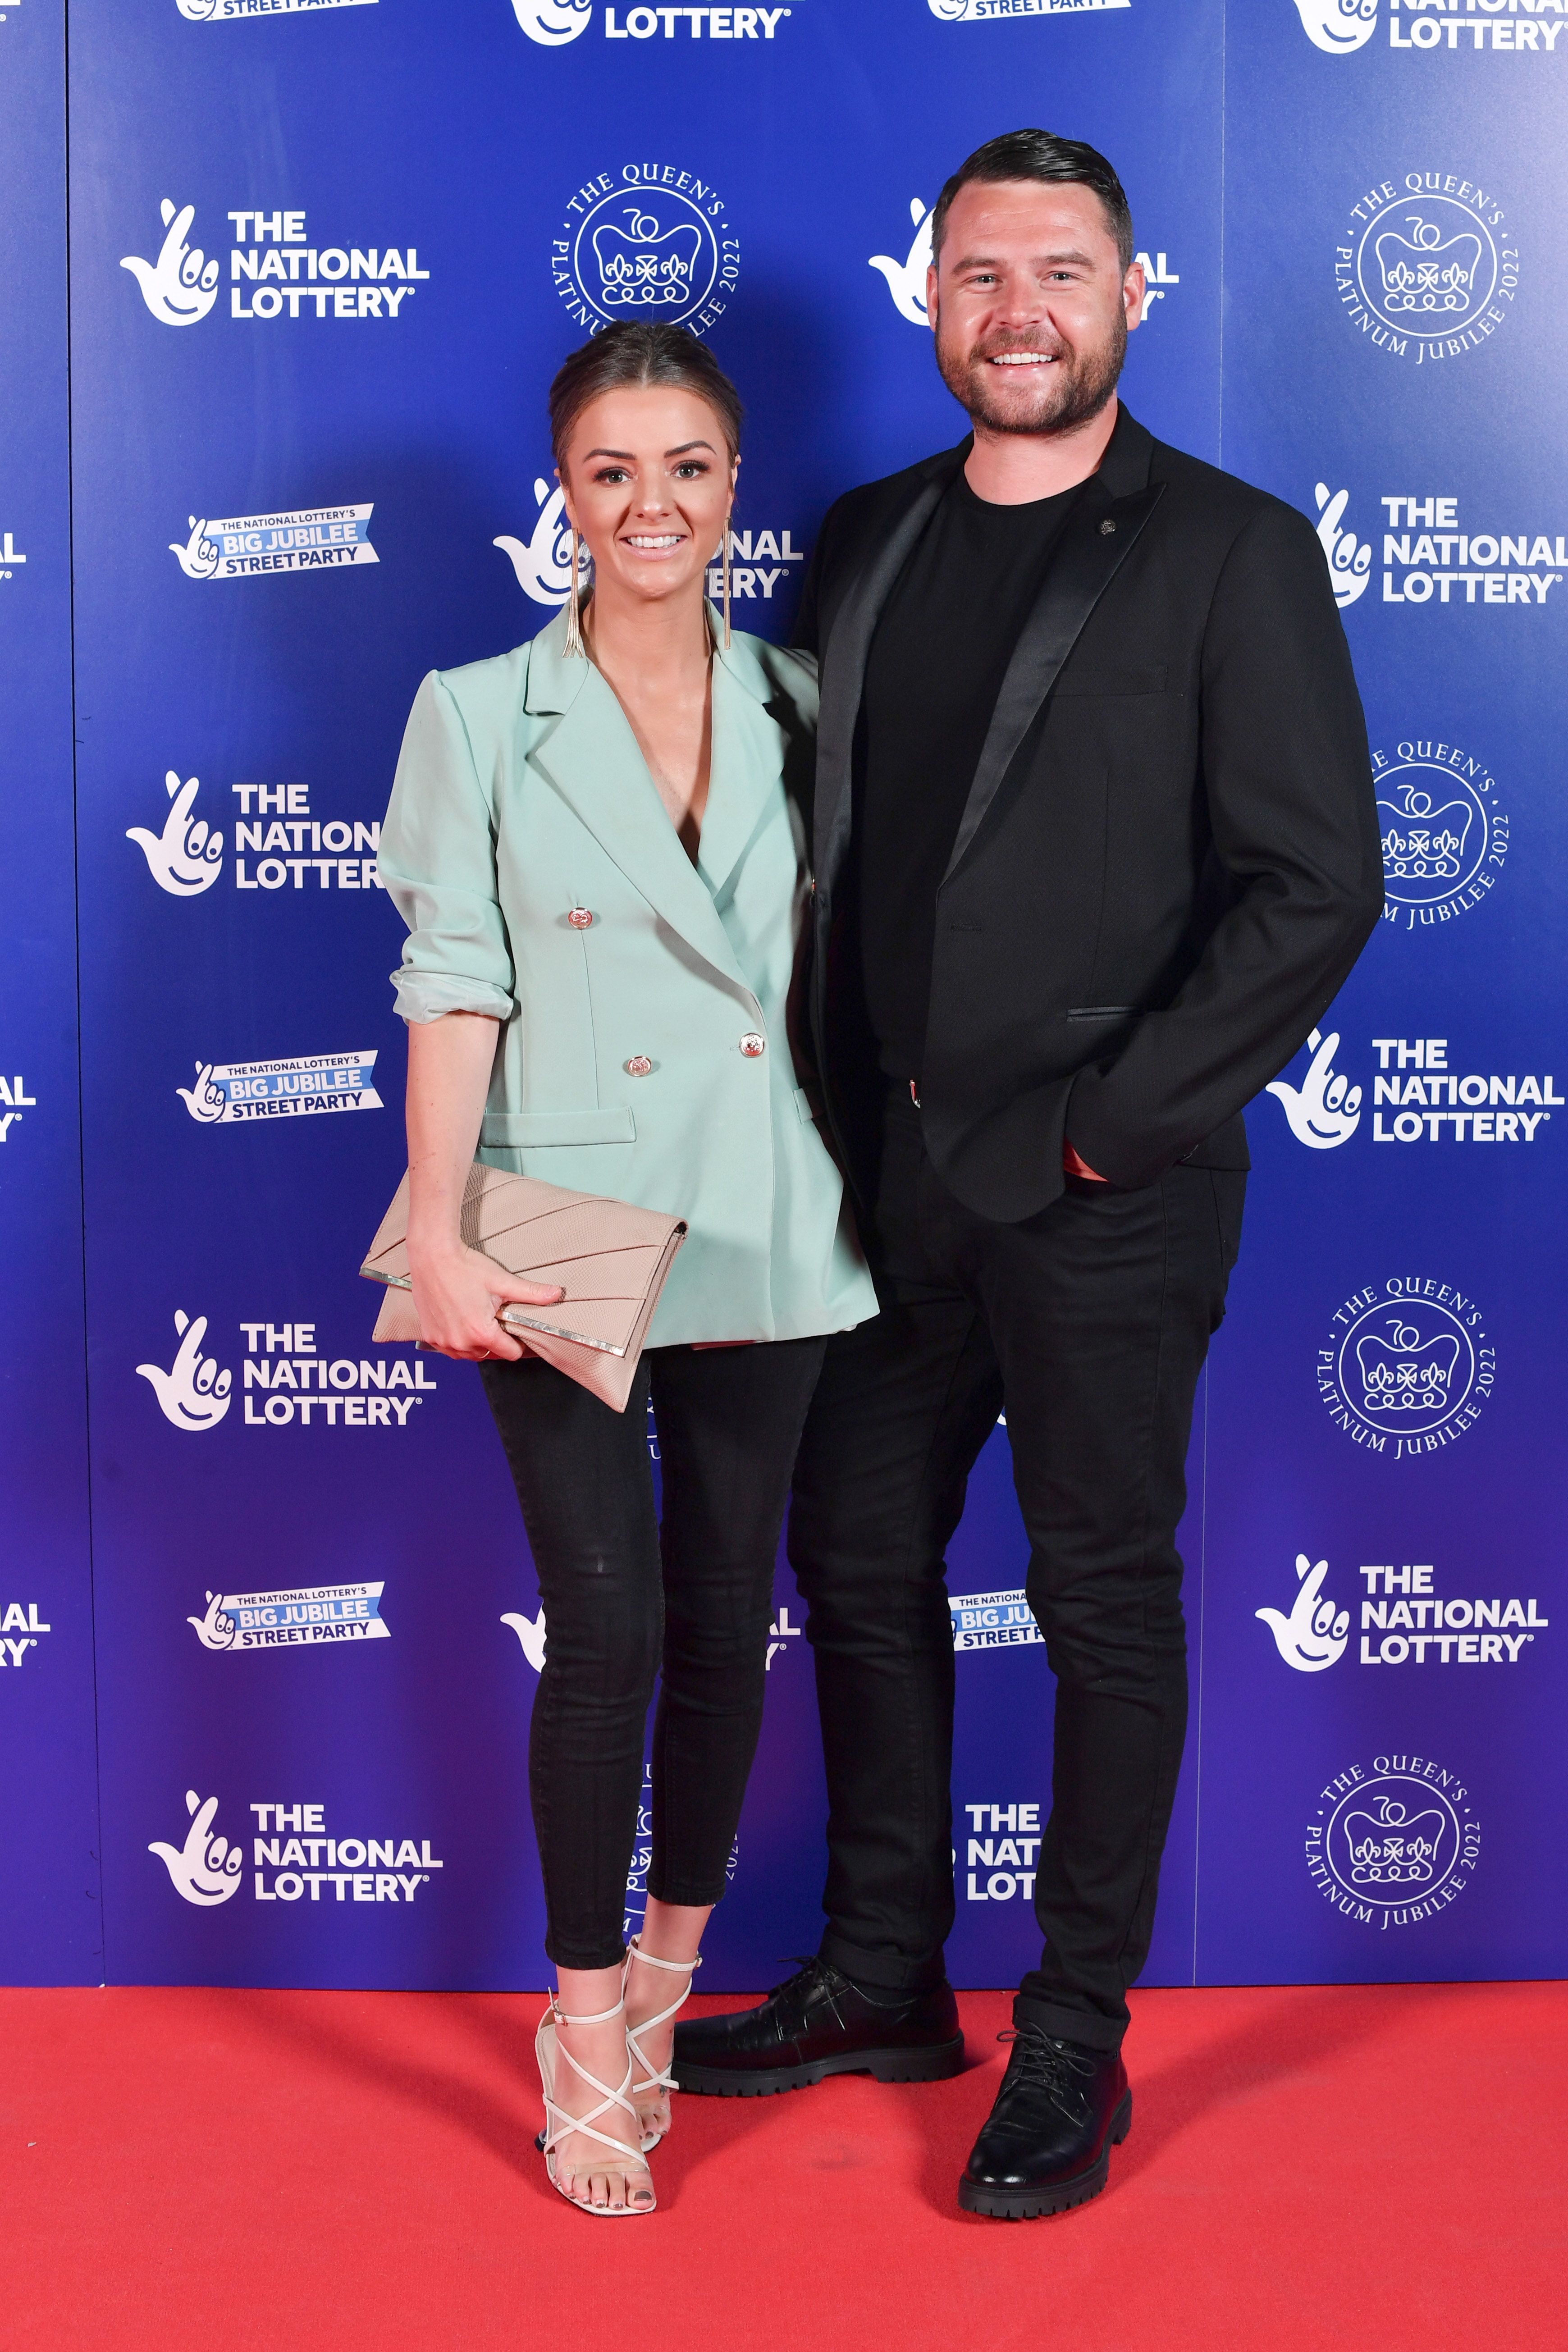 Emmerdale star Danny Miller and wife Steph Jones welcome second child picture image pic